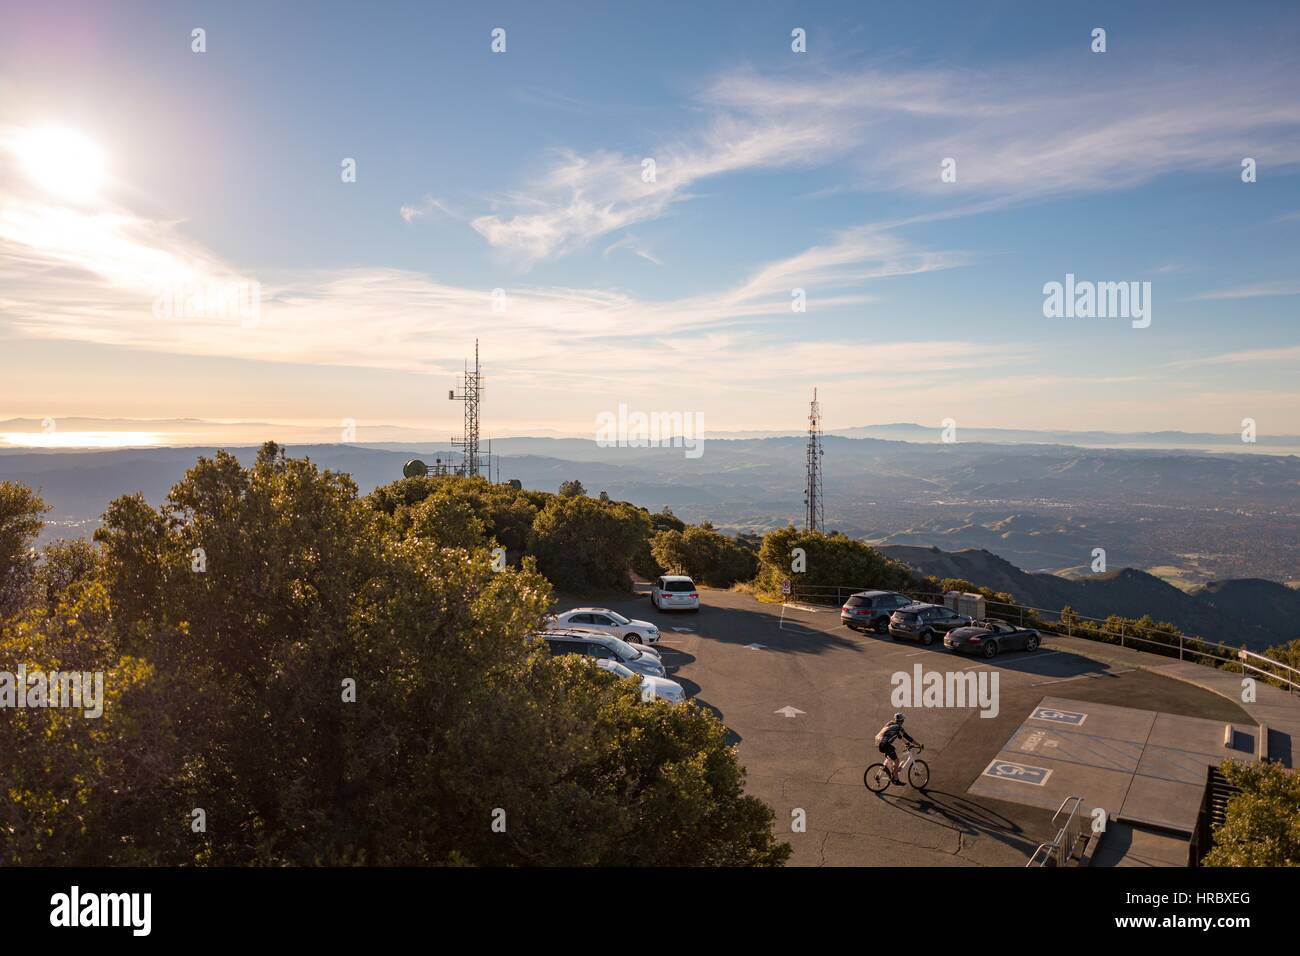 A biker cycles through a parking lot at the summit of Mount Diablo at dusk, in Walnut Creek, California, December 3, 2016. As the tallest peak in the San Francisco Bay Area, Mount Diablo is a popular destination for adventurous road cyclists. Stock Photo